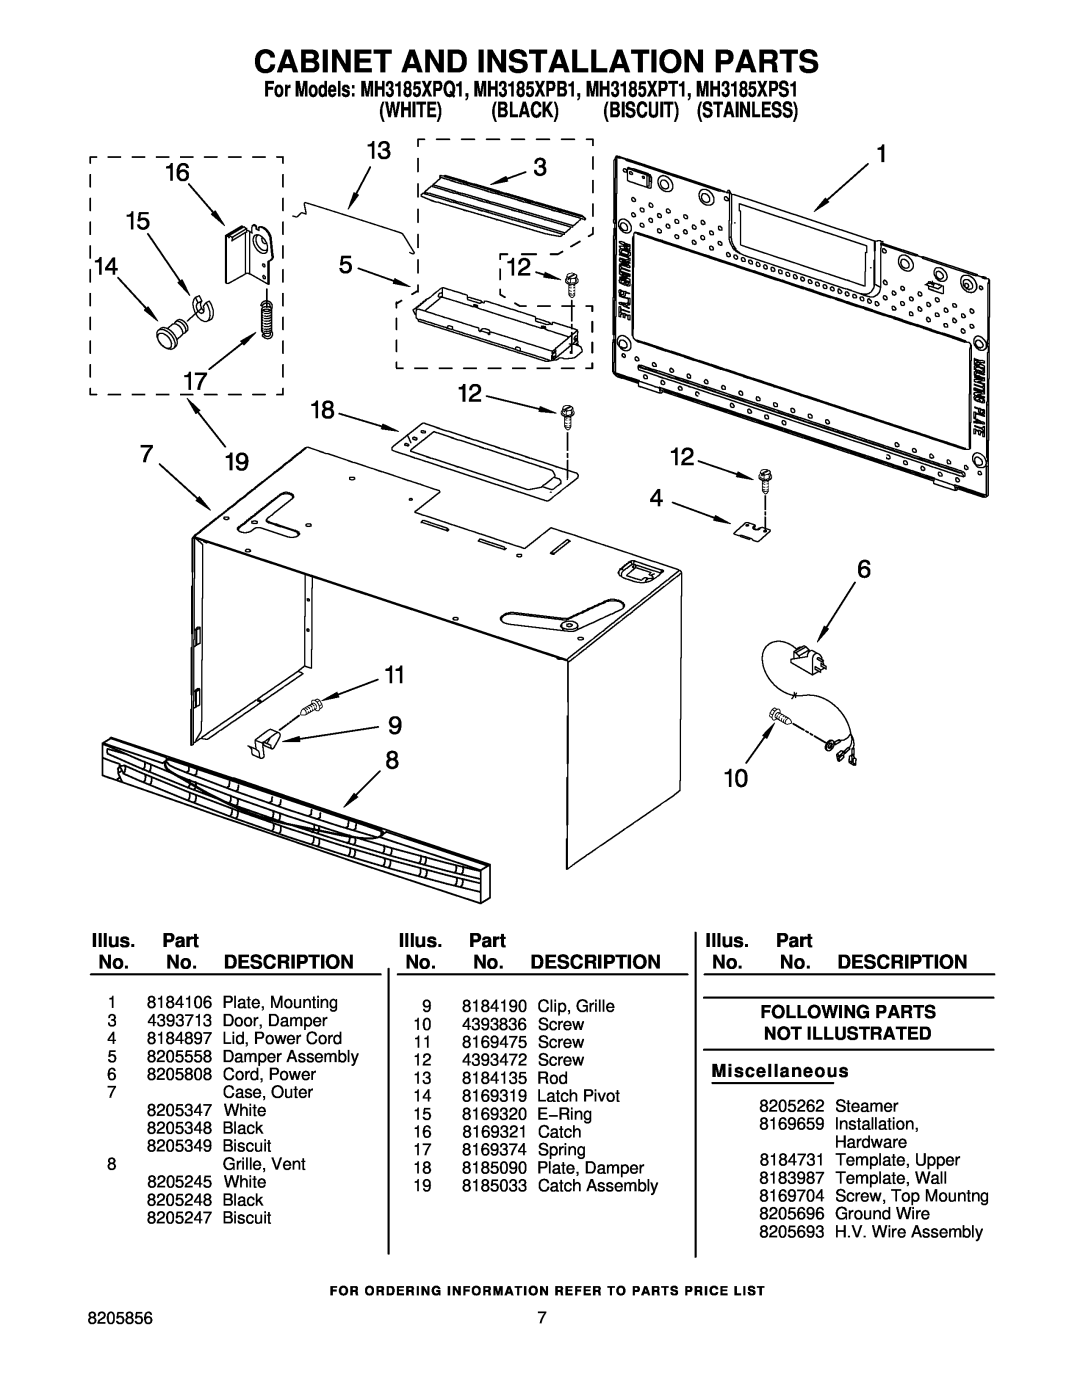 Whirlpool MH3185XPS1 manual Cabinet And Installation Parts, Illus. Part No. No. DESCRIPTION FOLLOWING PARTS, White, Black 